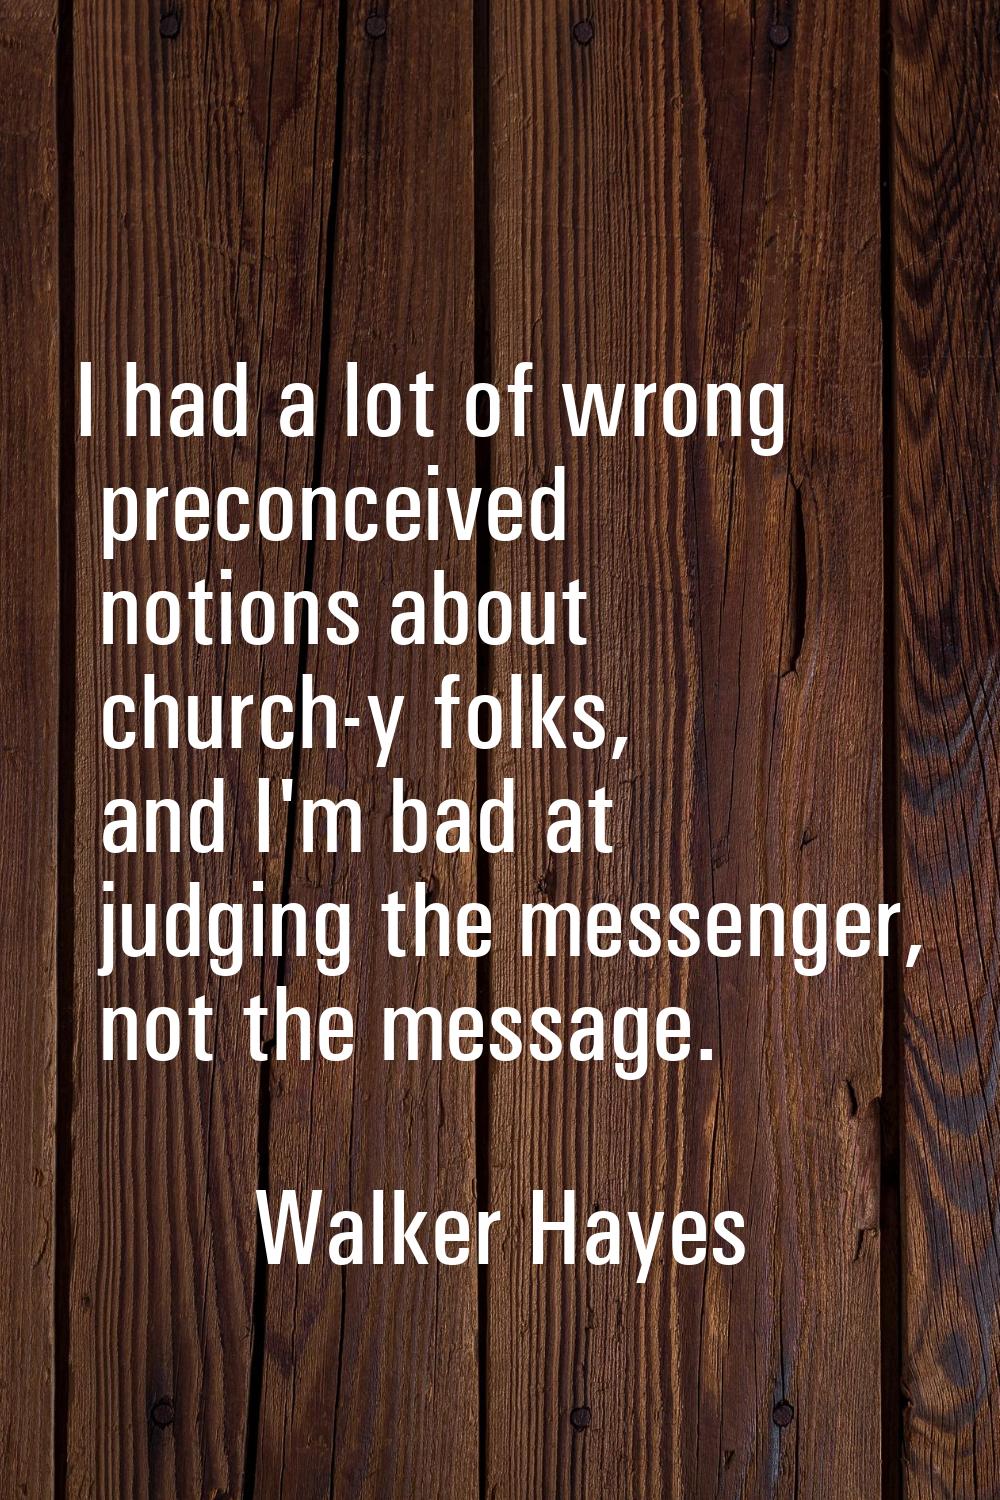 I had a lot of wrong preconceived notions about church-y folks, and I'm bad at judging the messenge